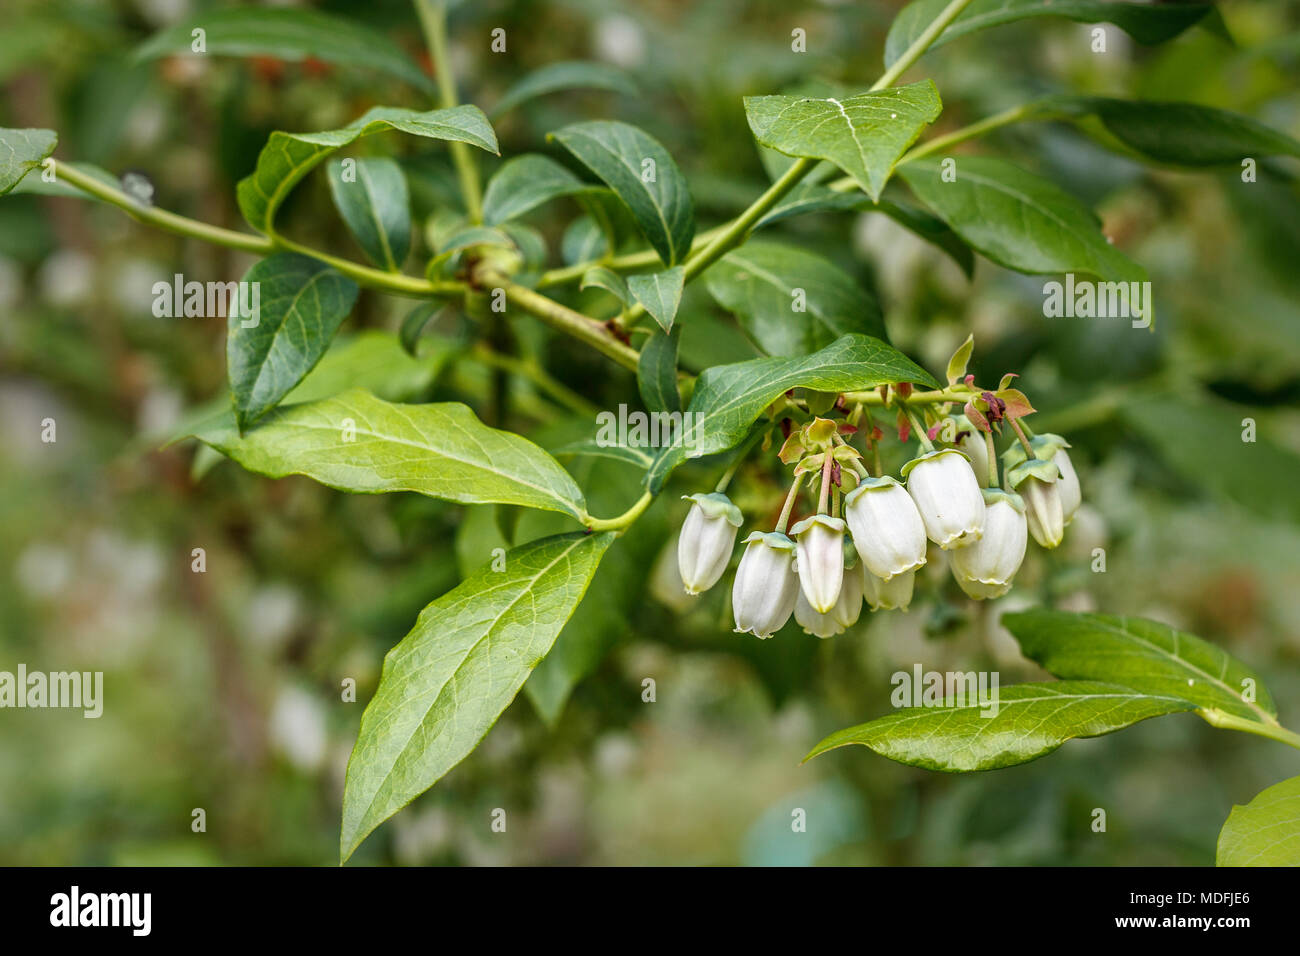 A cluster of white flowers hangs from a blueberry plant in the early bloom stage in spring, with green leaves and a blurred background. Stock Photo